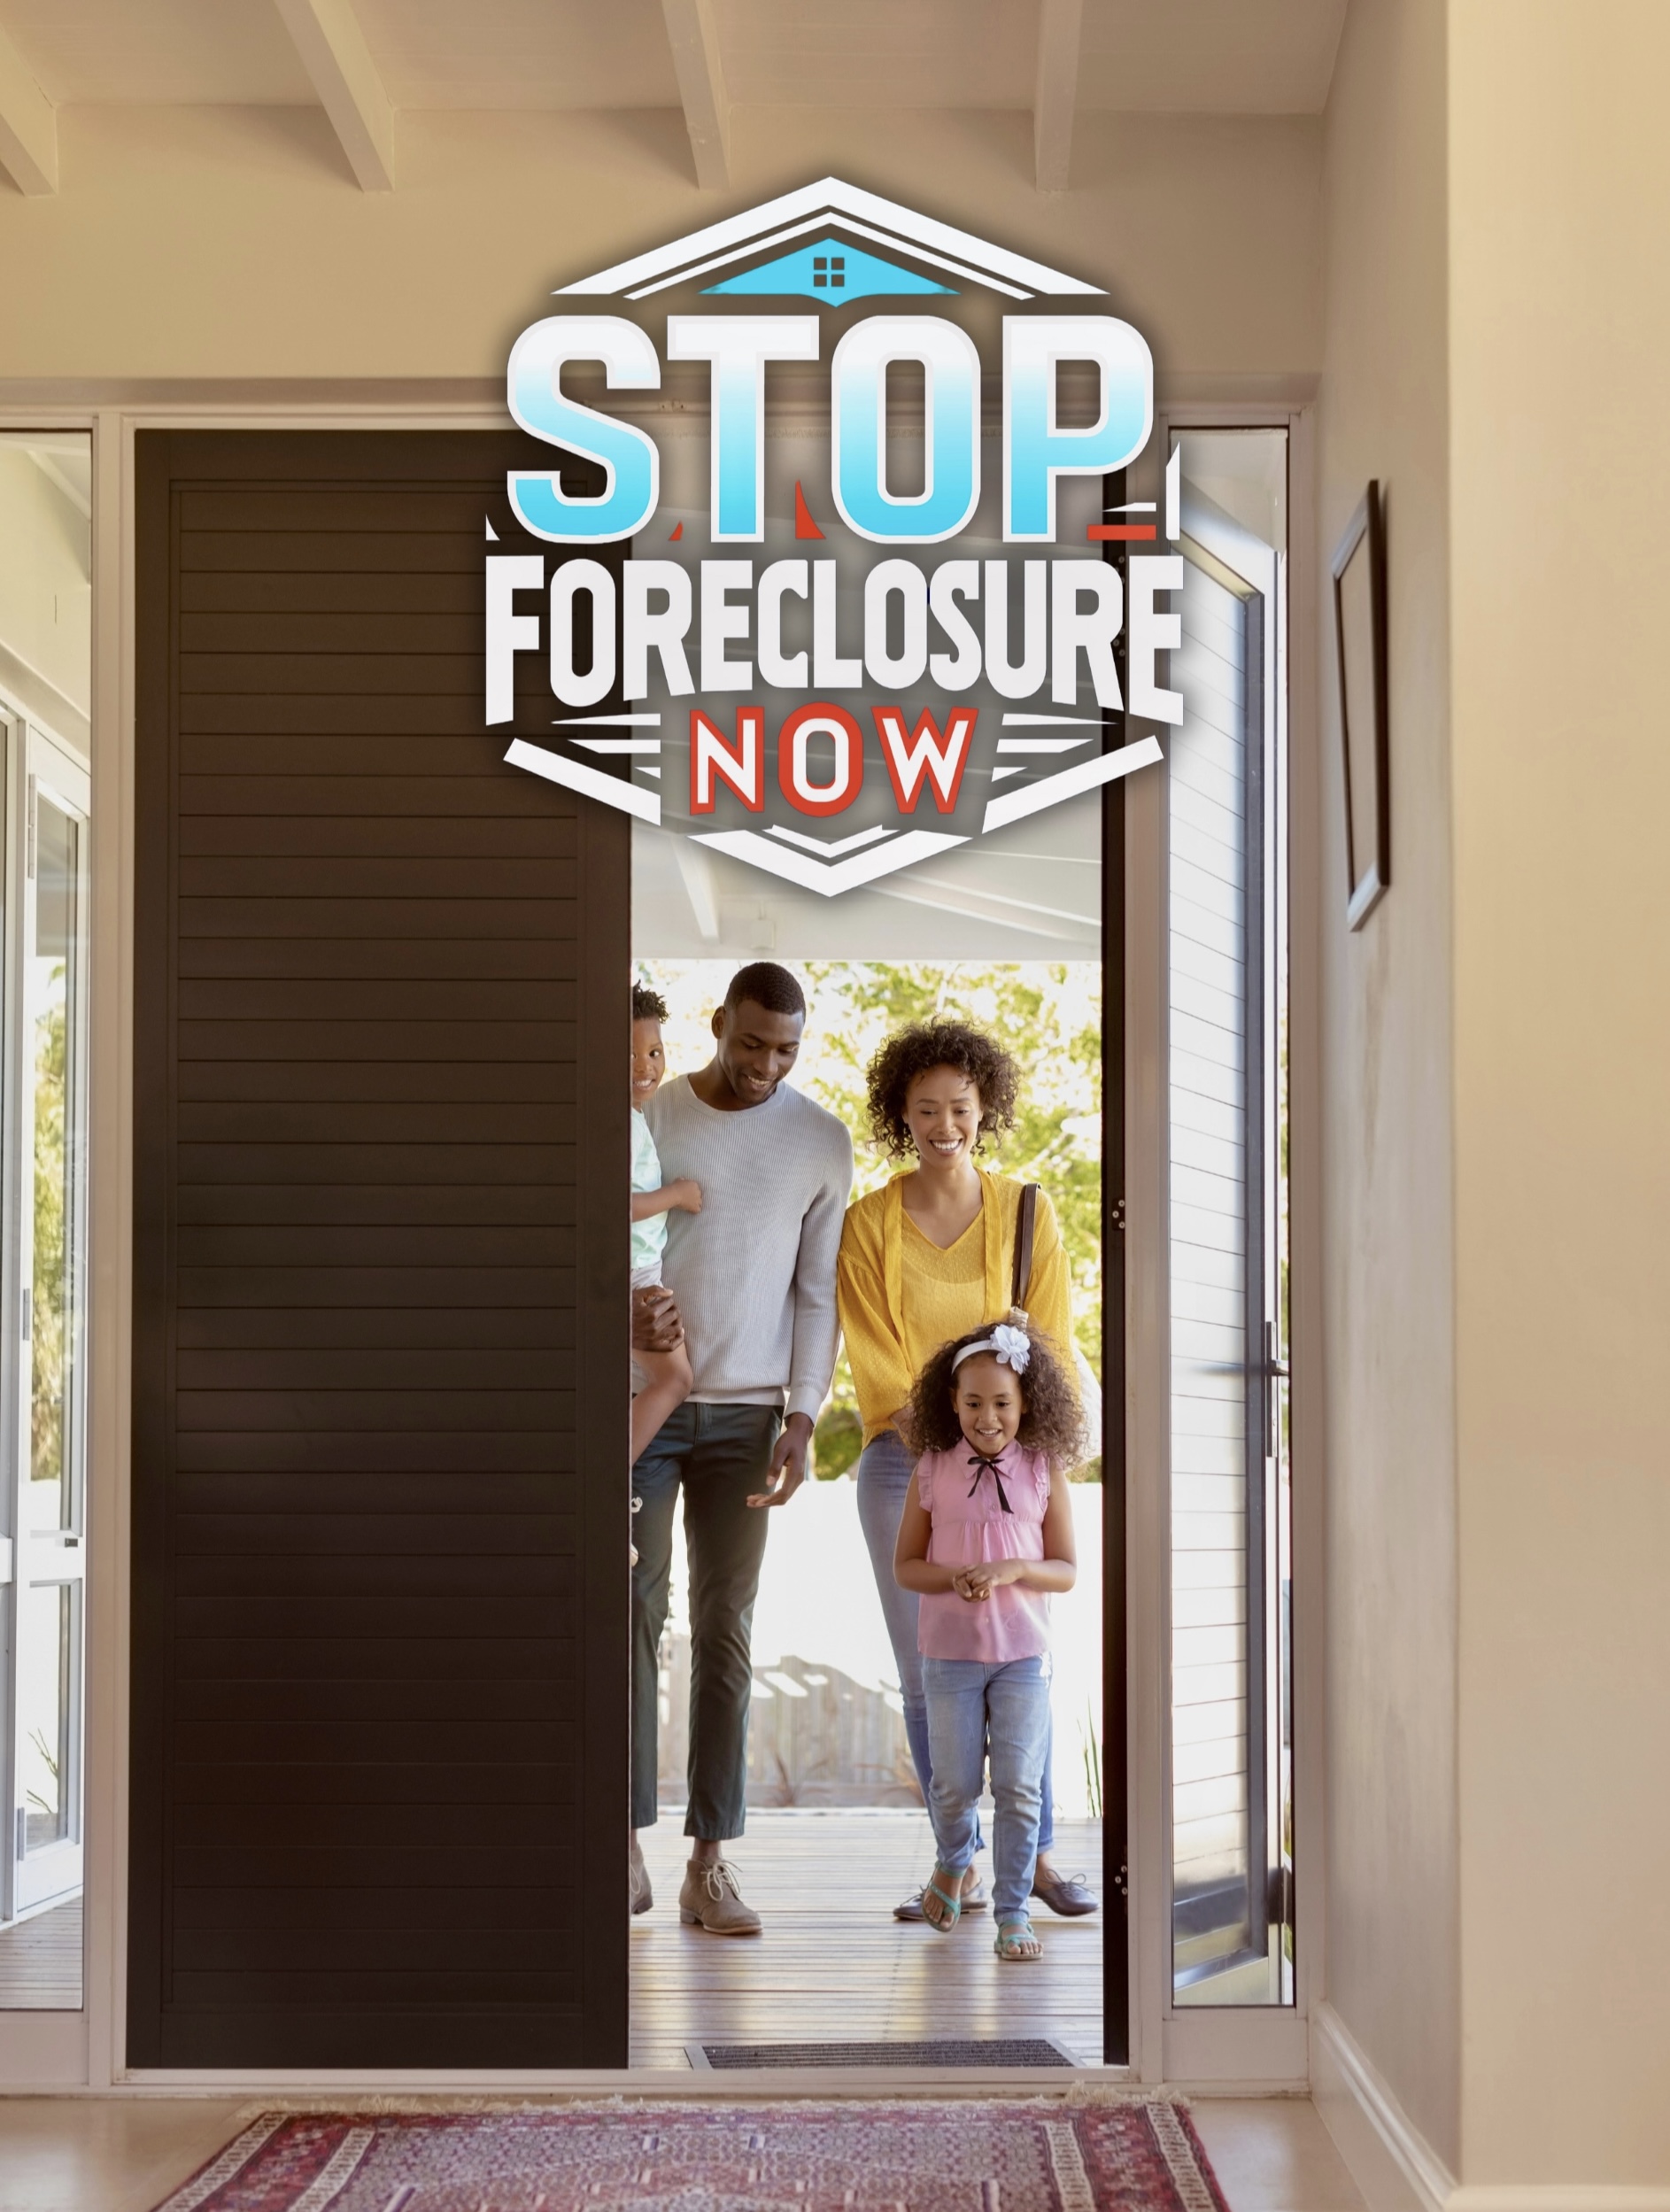 Image displays a family achieving a triumphant homecoming, embodying foreclosure triumph through extensive solutions like ‘foreclosure prevention,’ ‘home loan modification strategies,’ ‘mortgage assistance programs,’ ‘legal aid for foreclosure,’ and ‘effective financial counseling.’ Their journey reflects a successful navigation of the foreclosure process, showcasing a powerful example of home retention and financial stability.